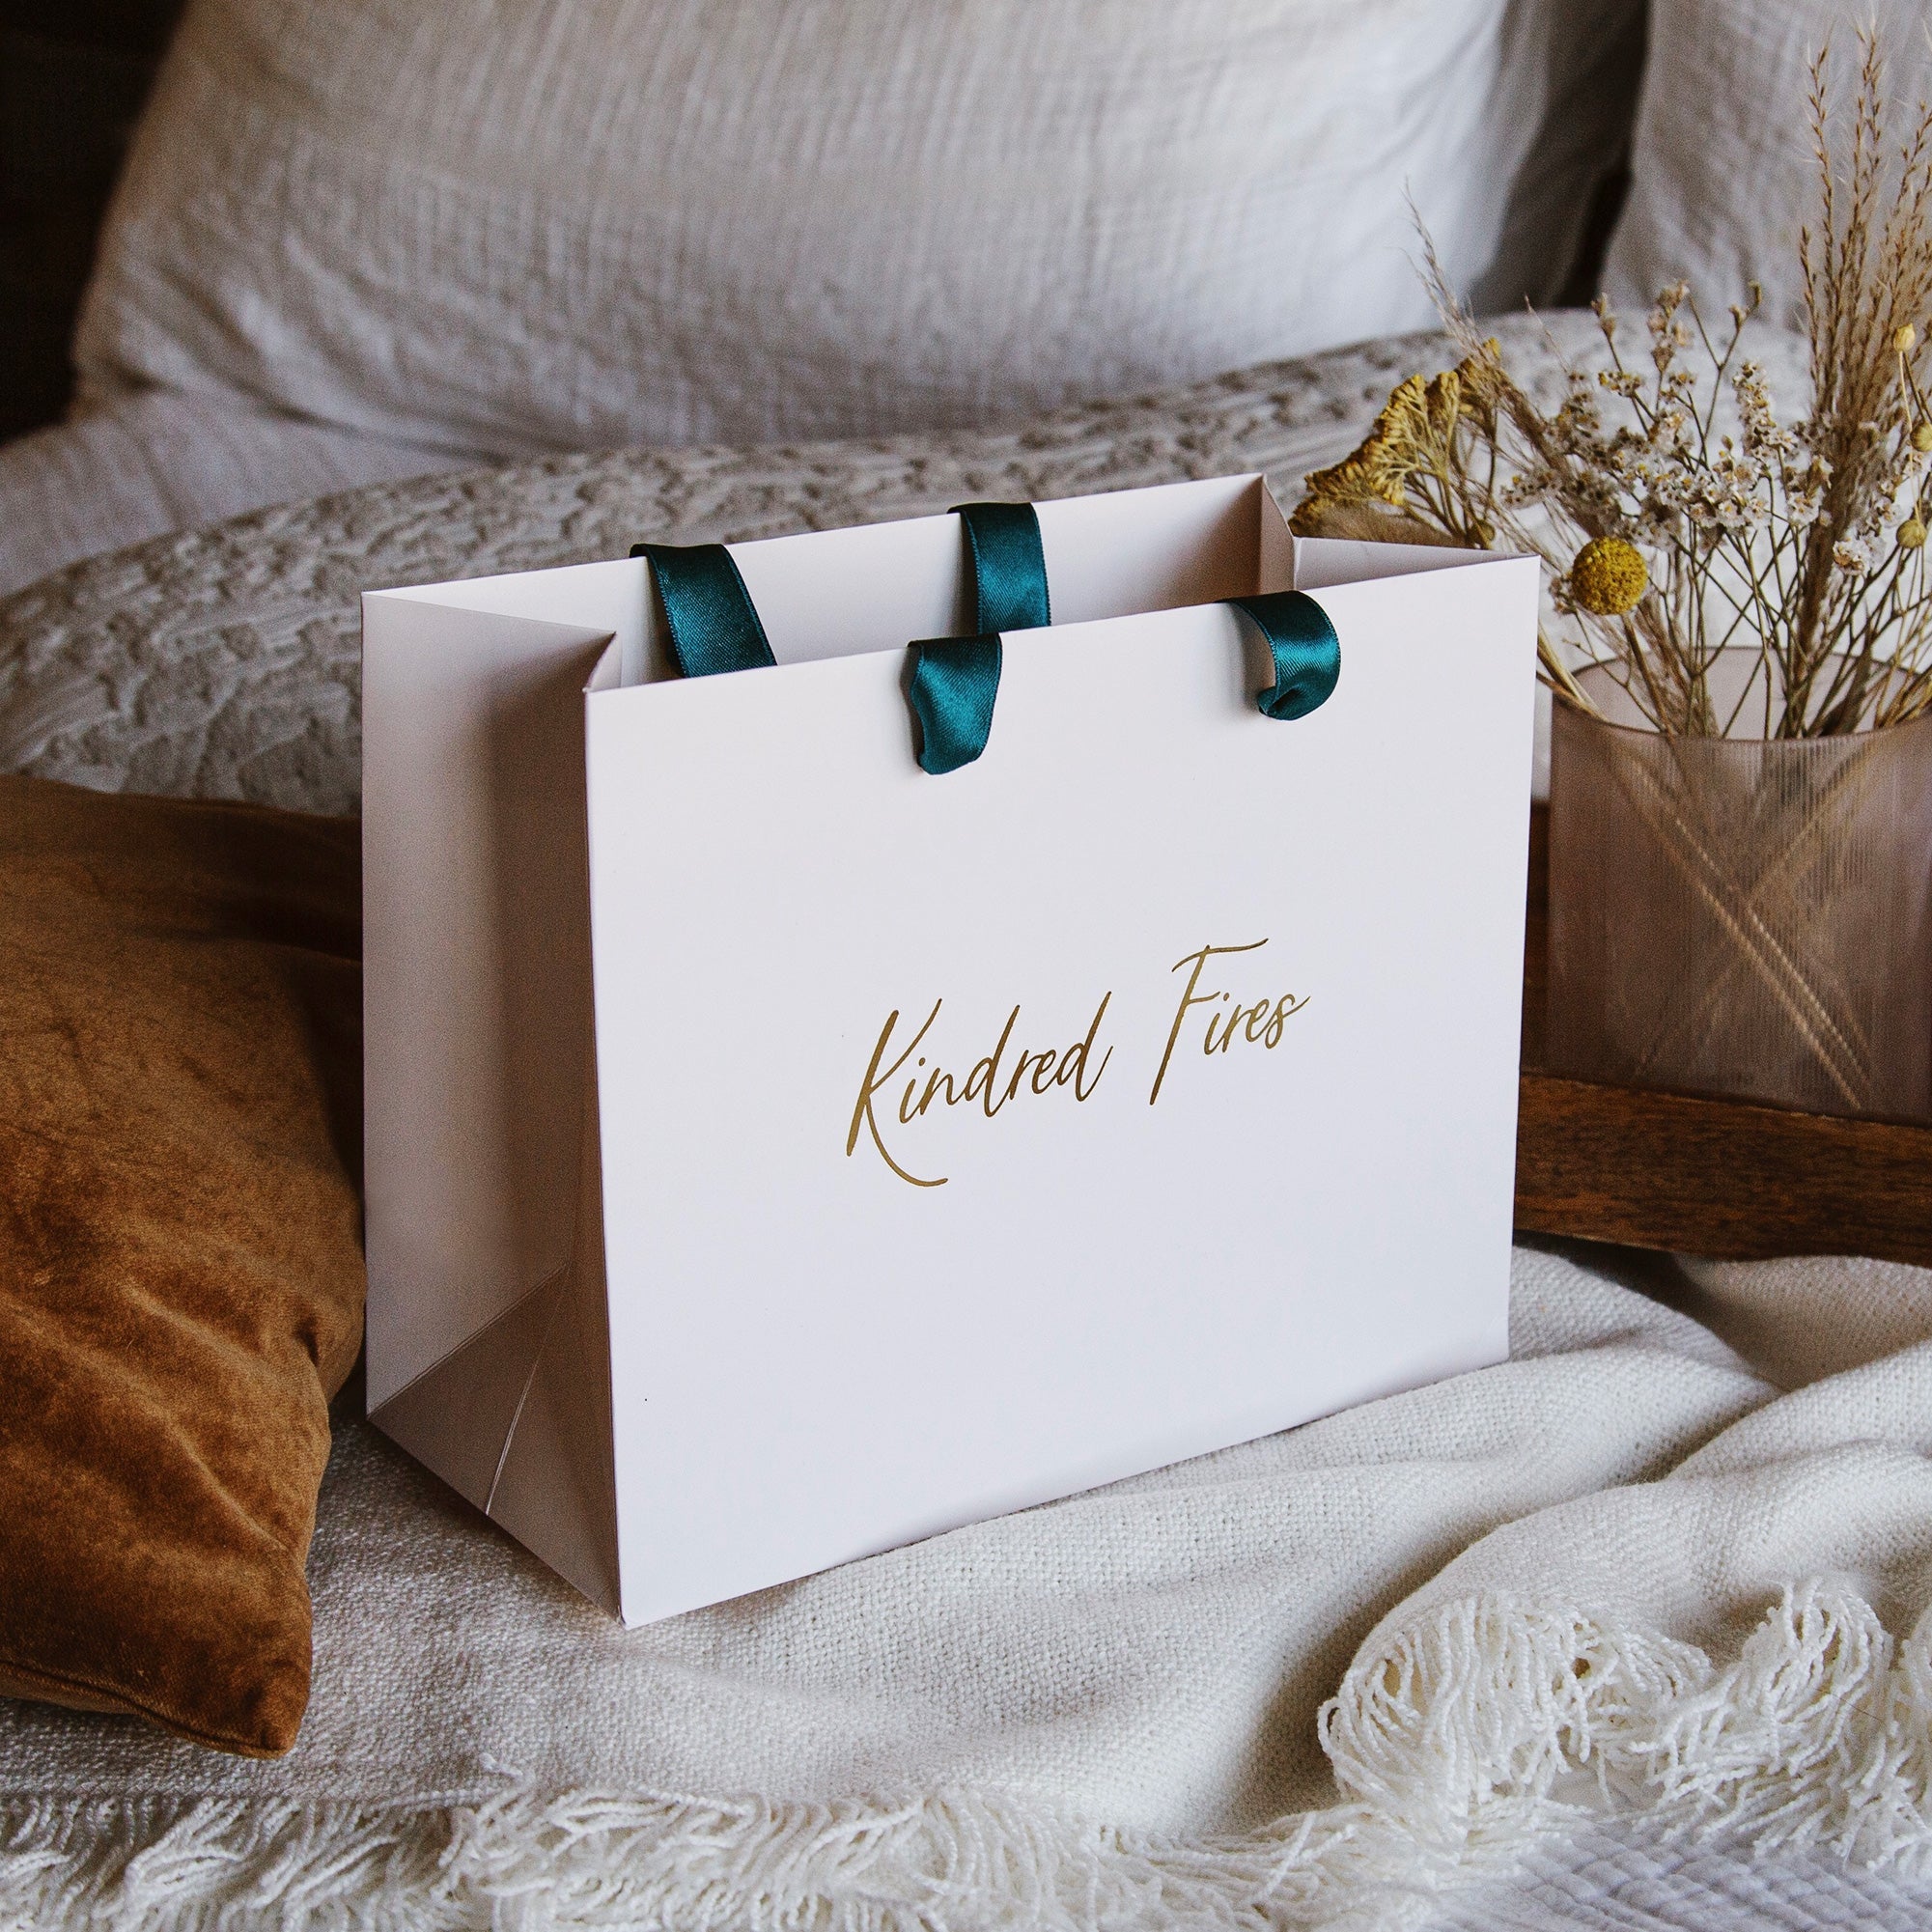 Personalised Wedding Gift Ideas for the To-Be-Wed Couples | WeddingBazaar